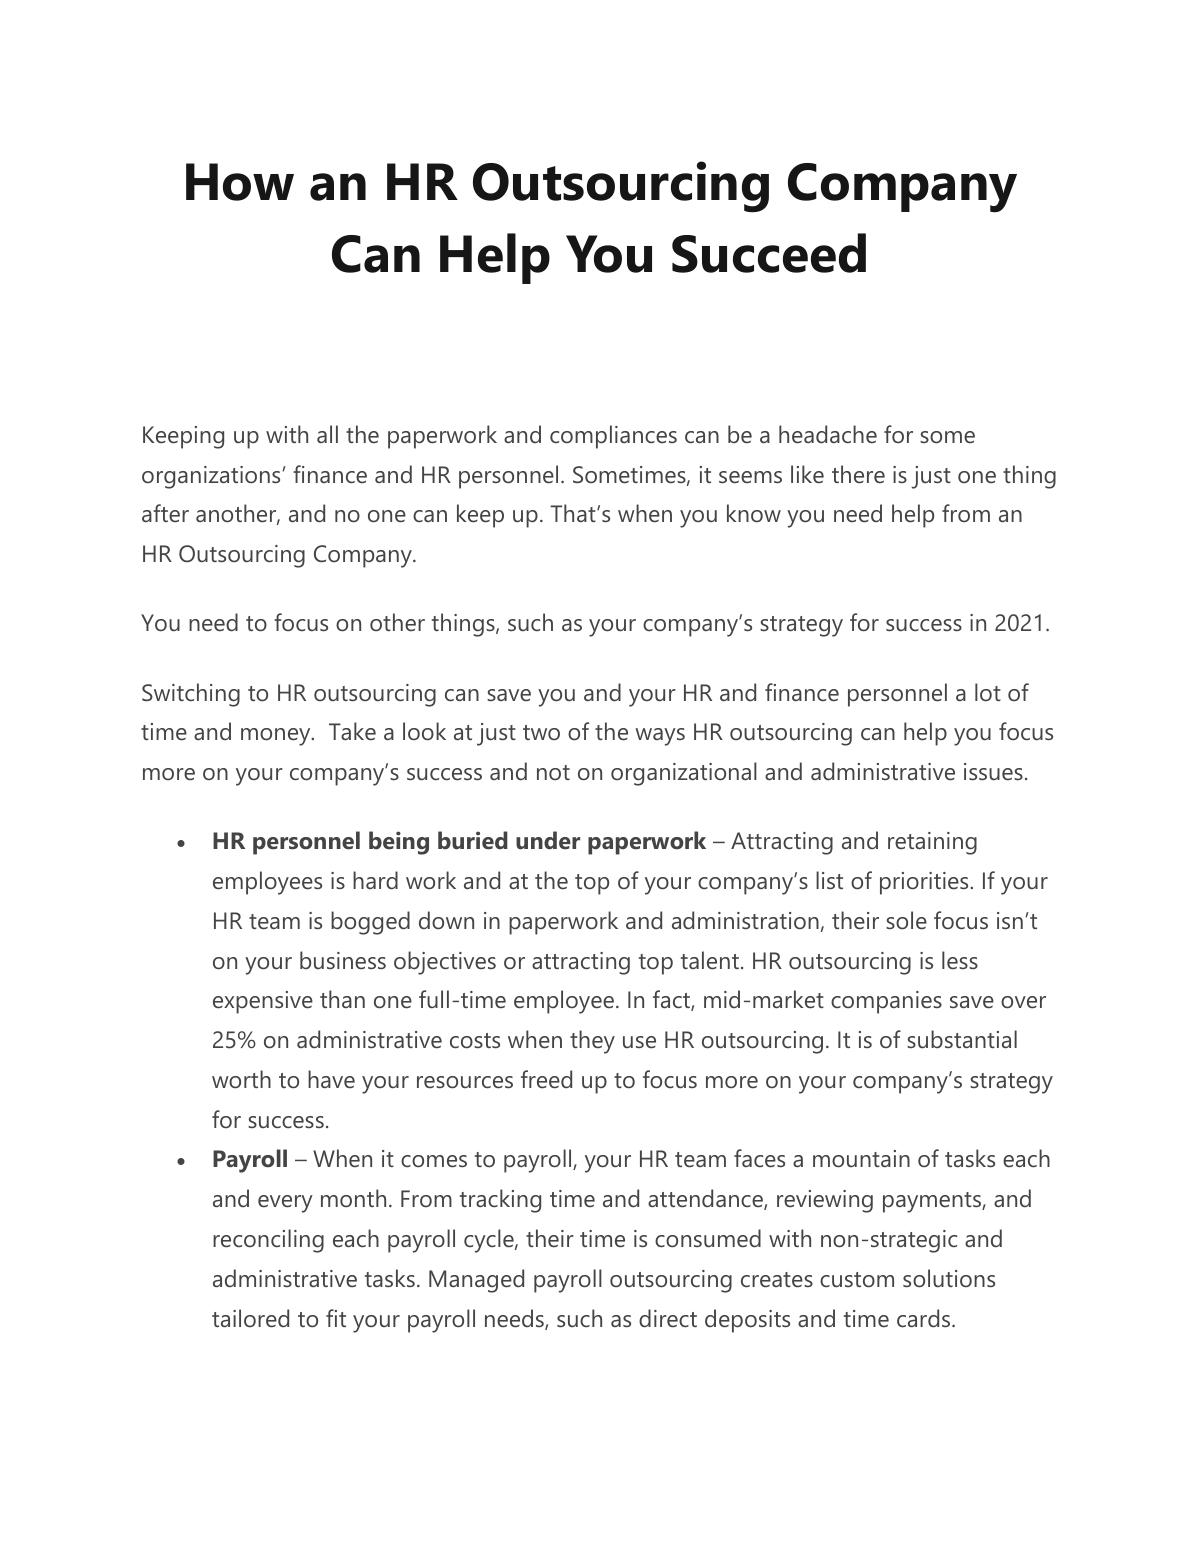 How an HR Outsourcing Company Can Help You Succeed 